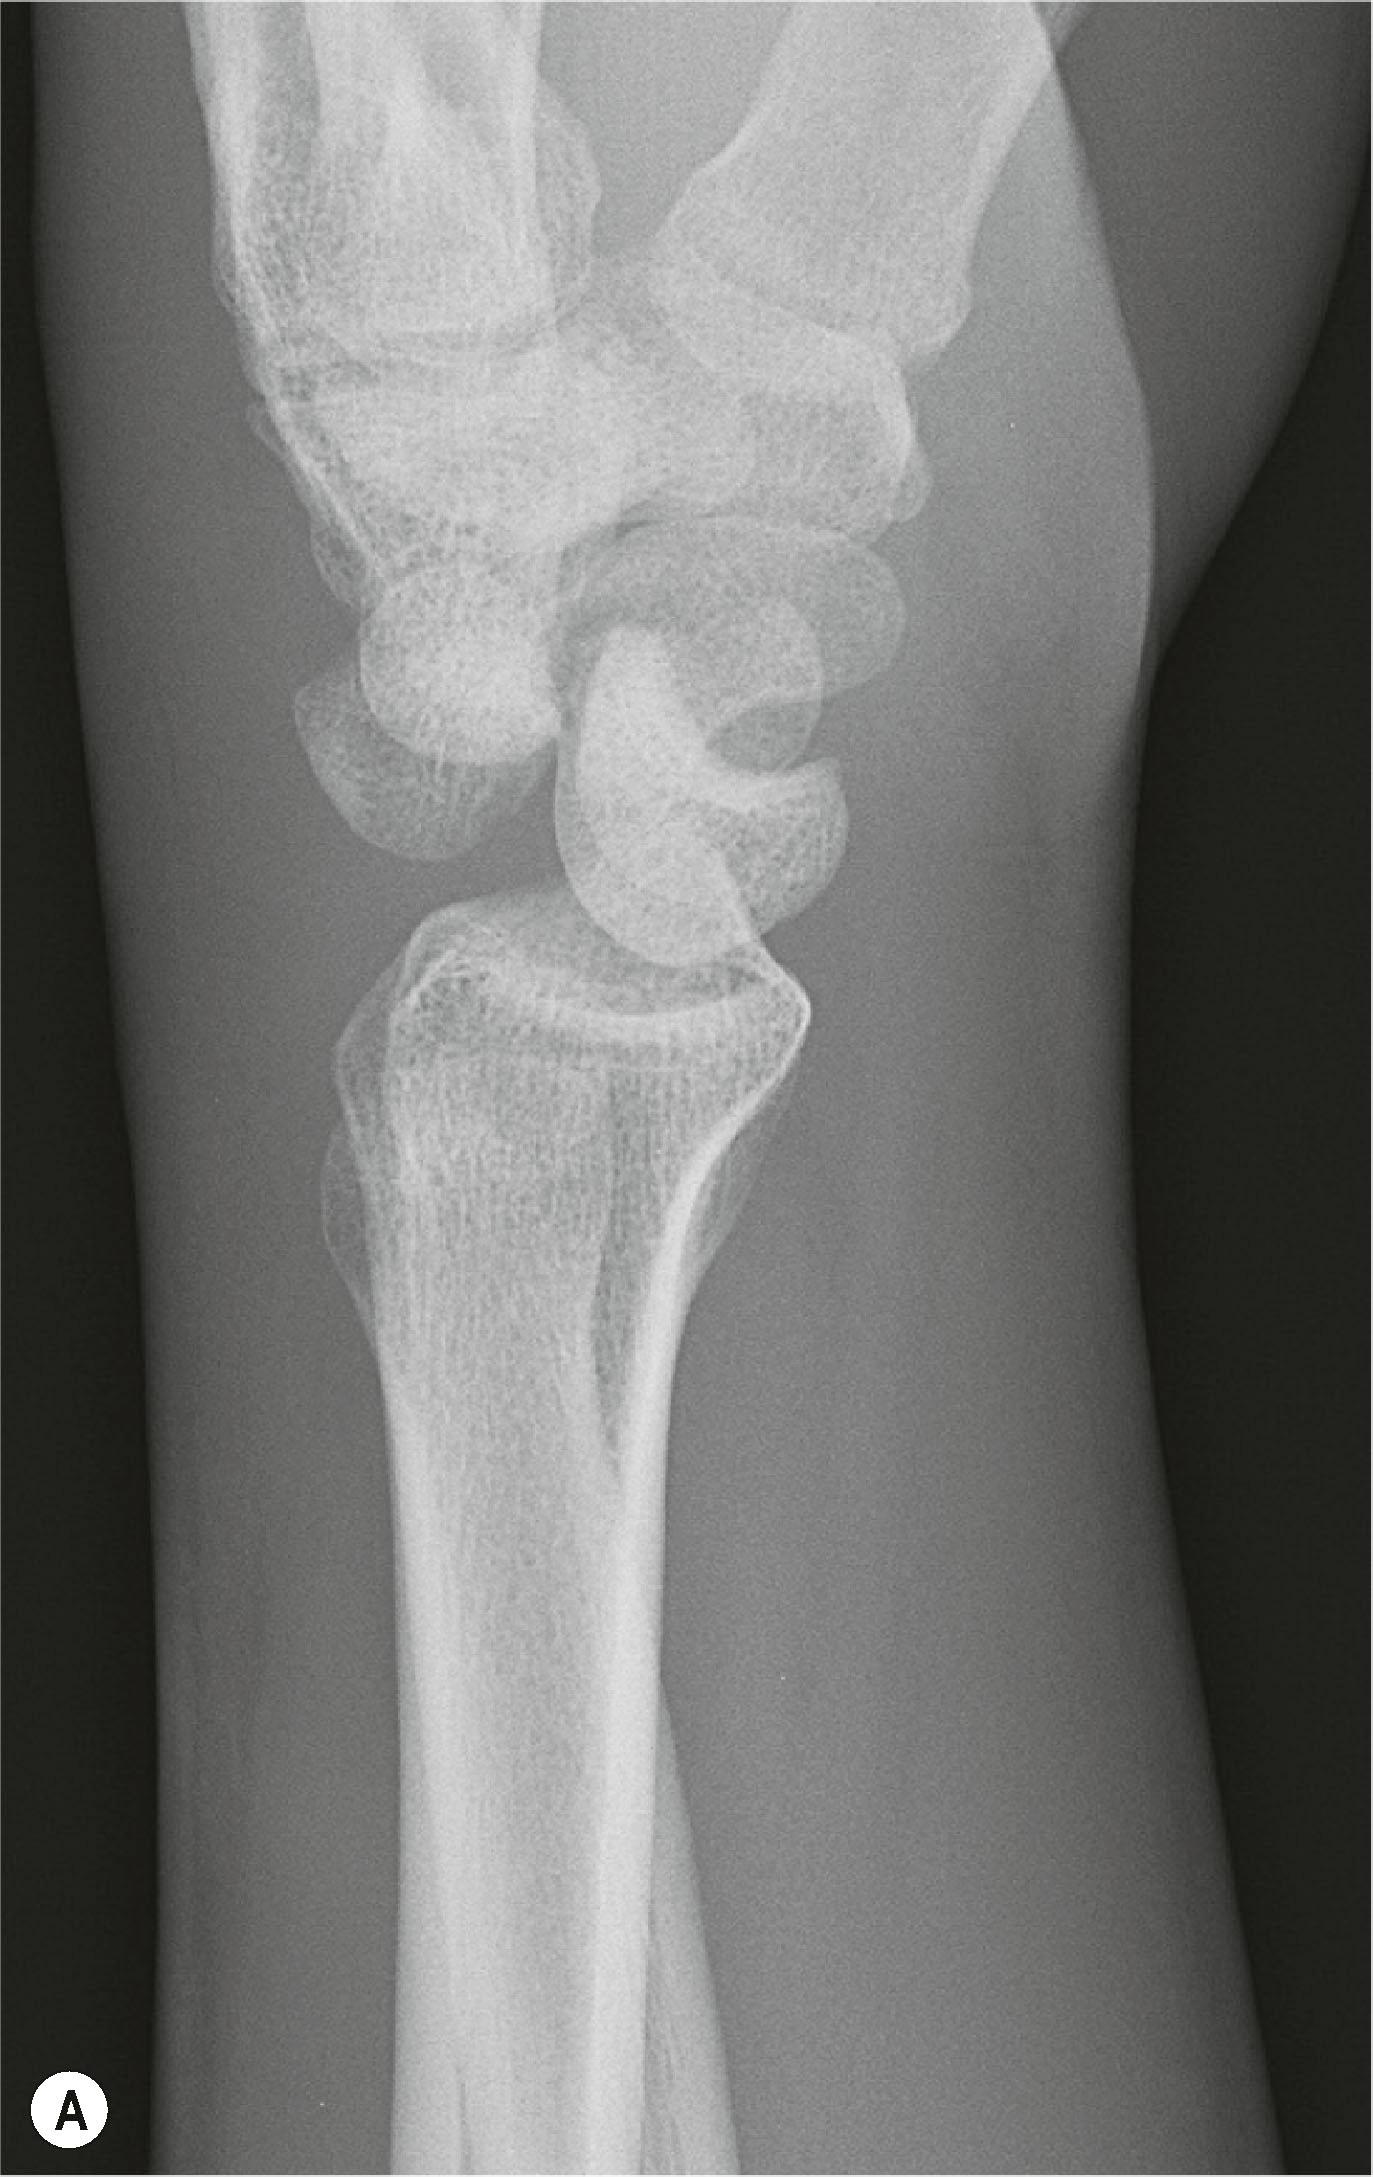 Figure 8.7, Lateral radiograph examples of (A) perilunate dislocation and (B) lunate dislocation injury patterns.